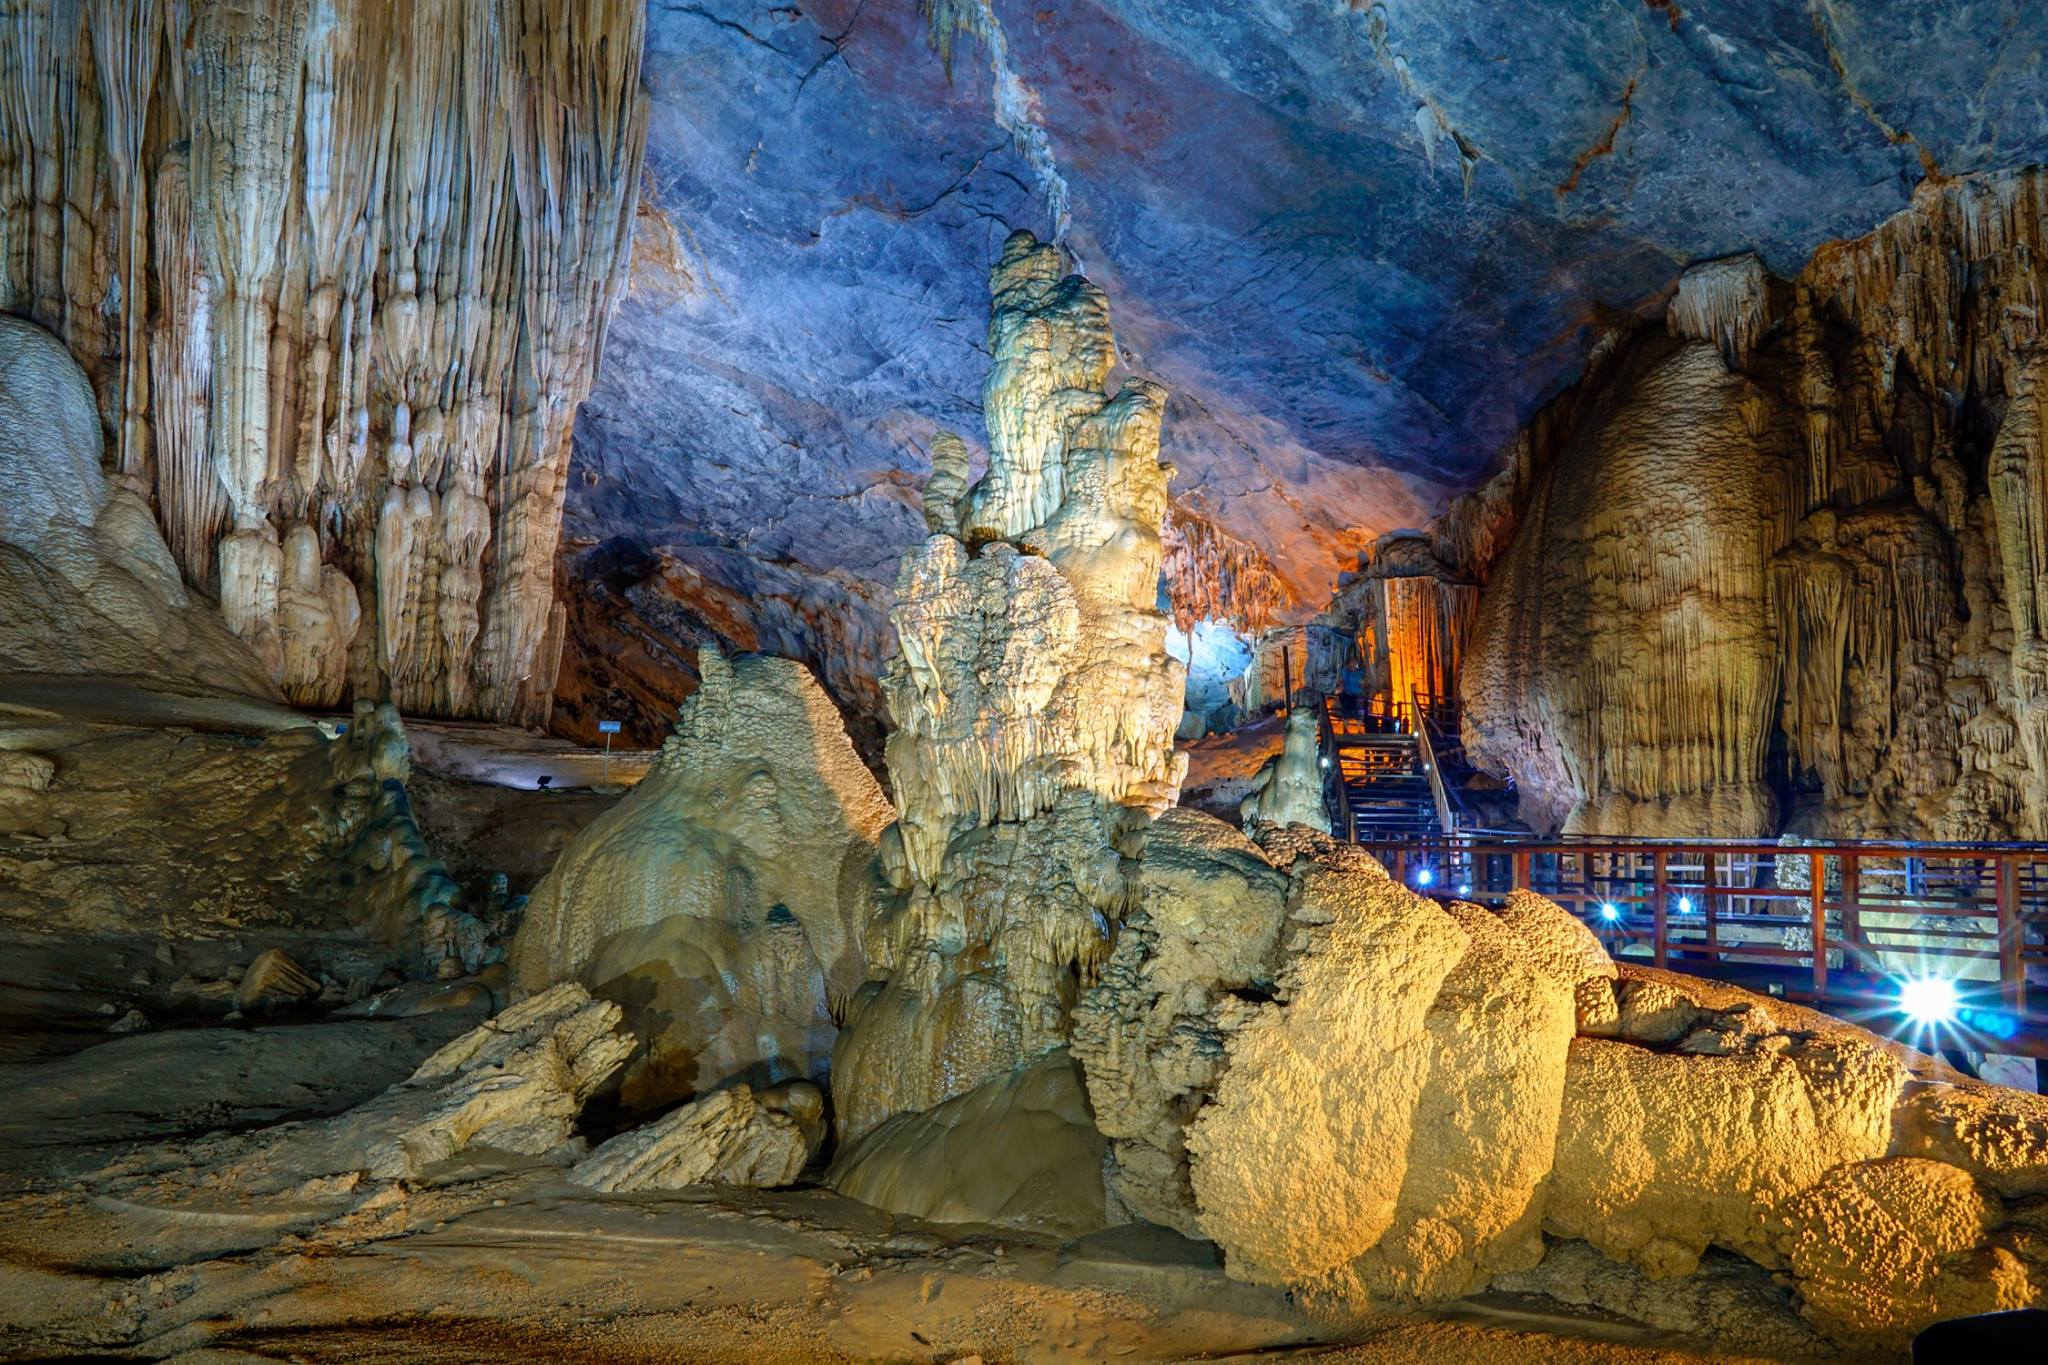 The stalactite was formed hundreds of millions of years